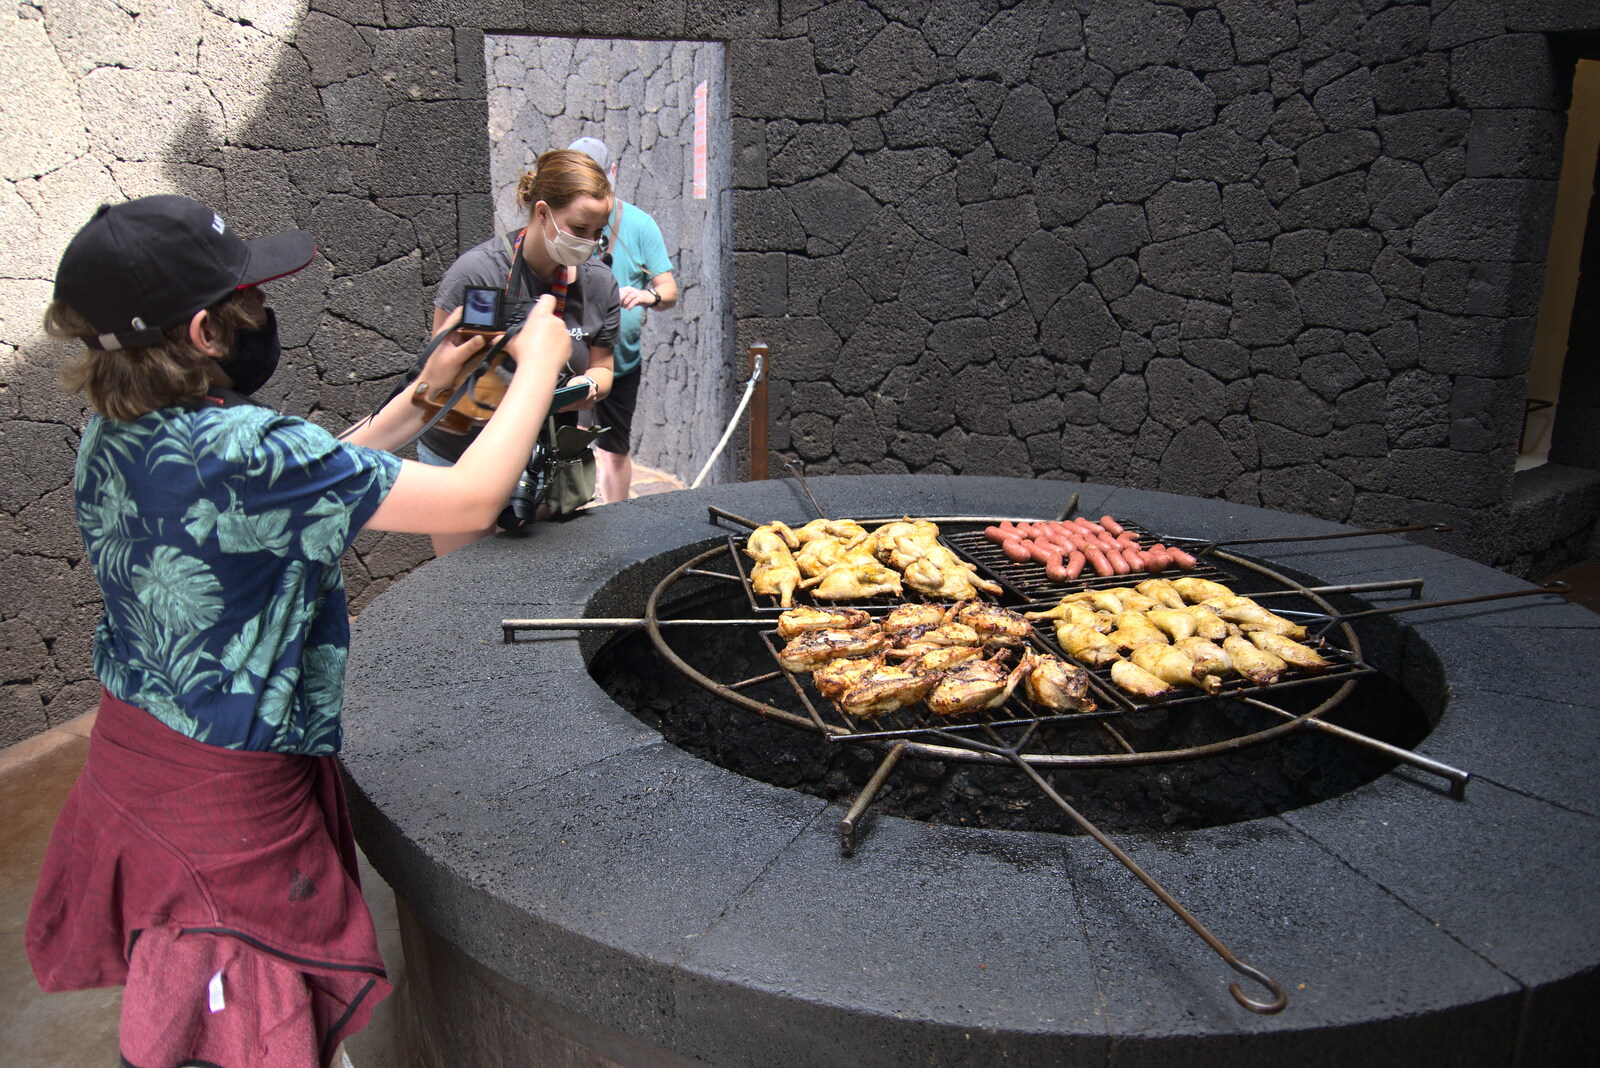 Food cooks over actual volcanic hot rocks from The Volcanoes of Lanzarote, Canary Islands, Spain - 27th October 2021